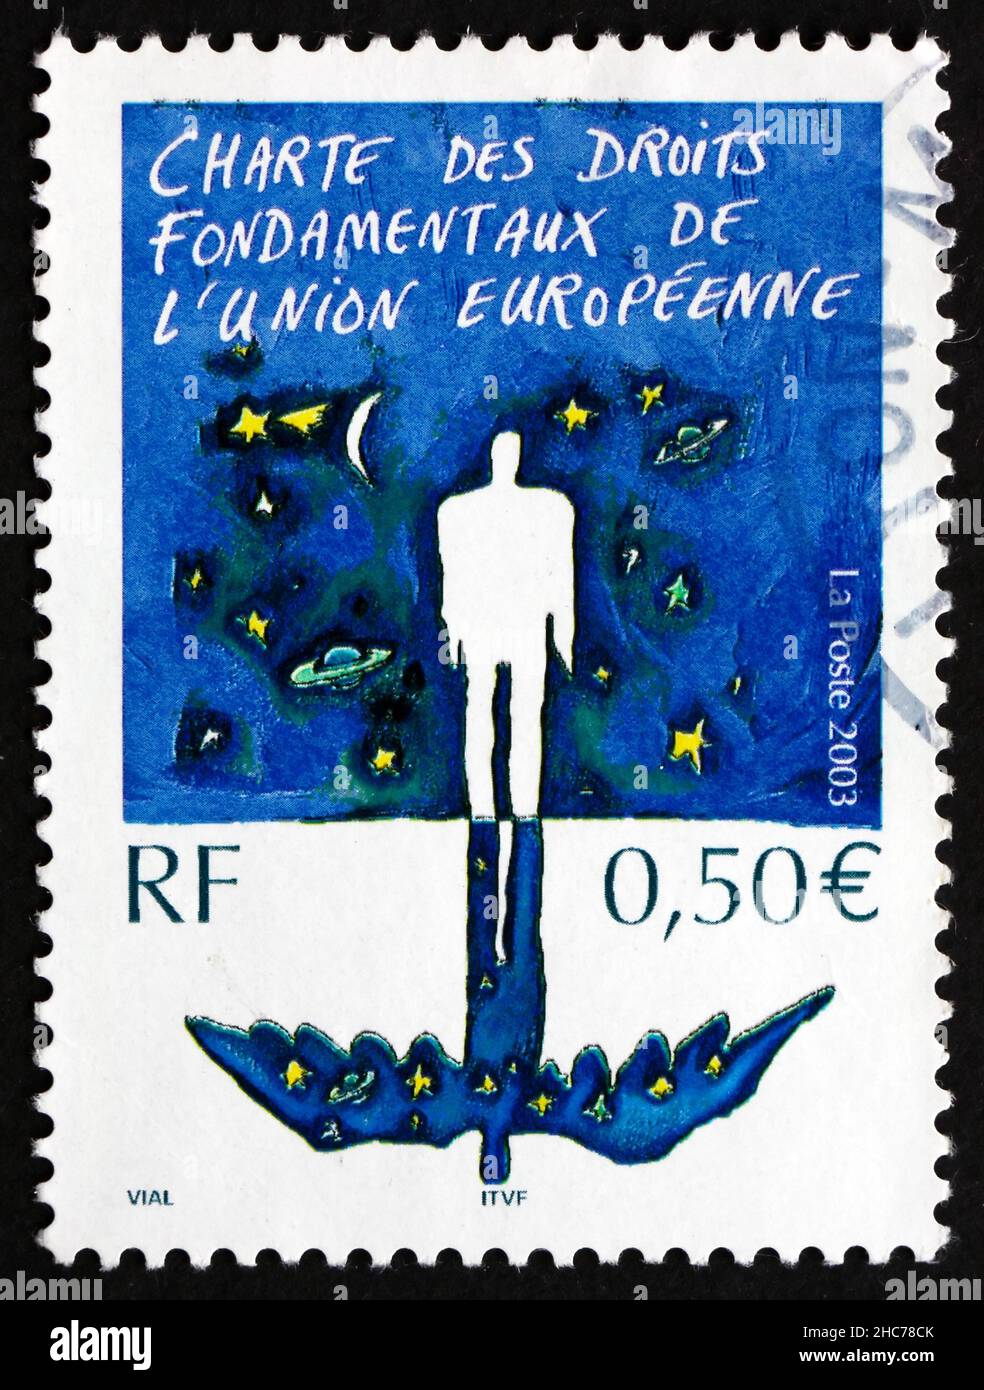 FRANCE - CIRCA 2003: a stamp printed in the France shows Charter of Fundamental Rights of the European Union, circa 2003 Stock Photo